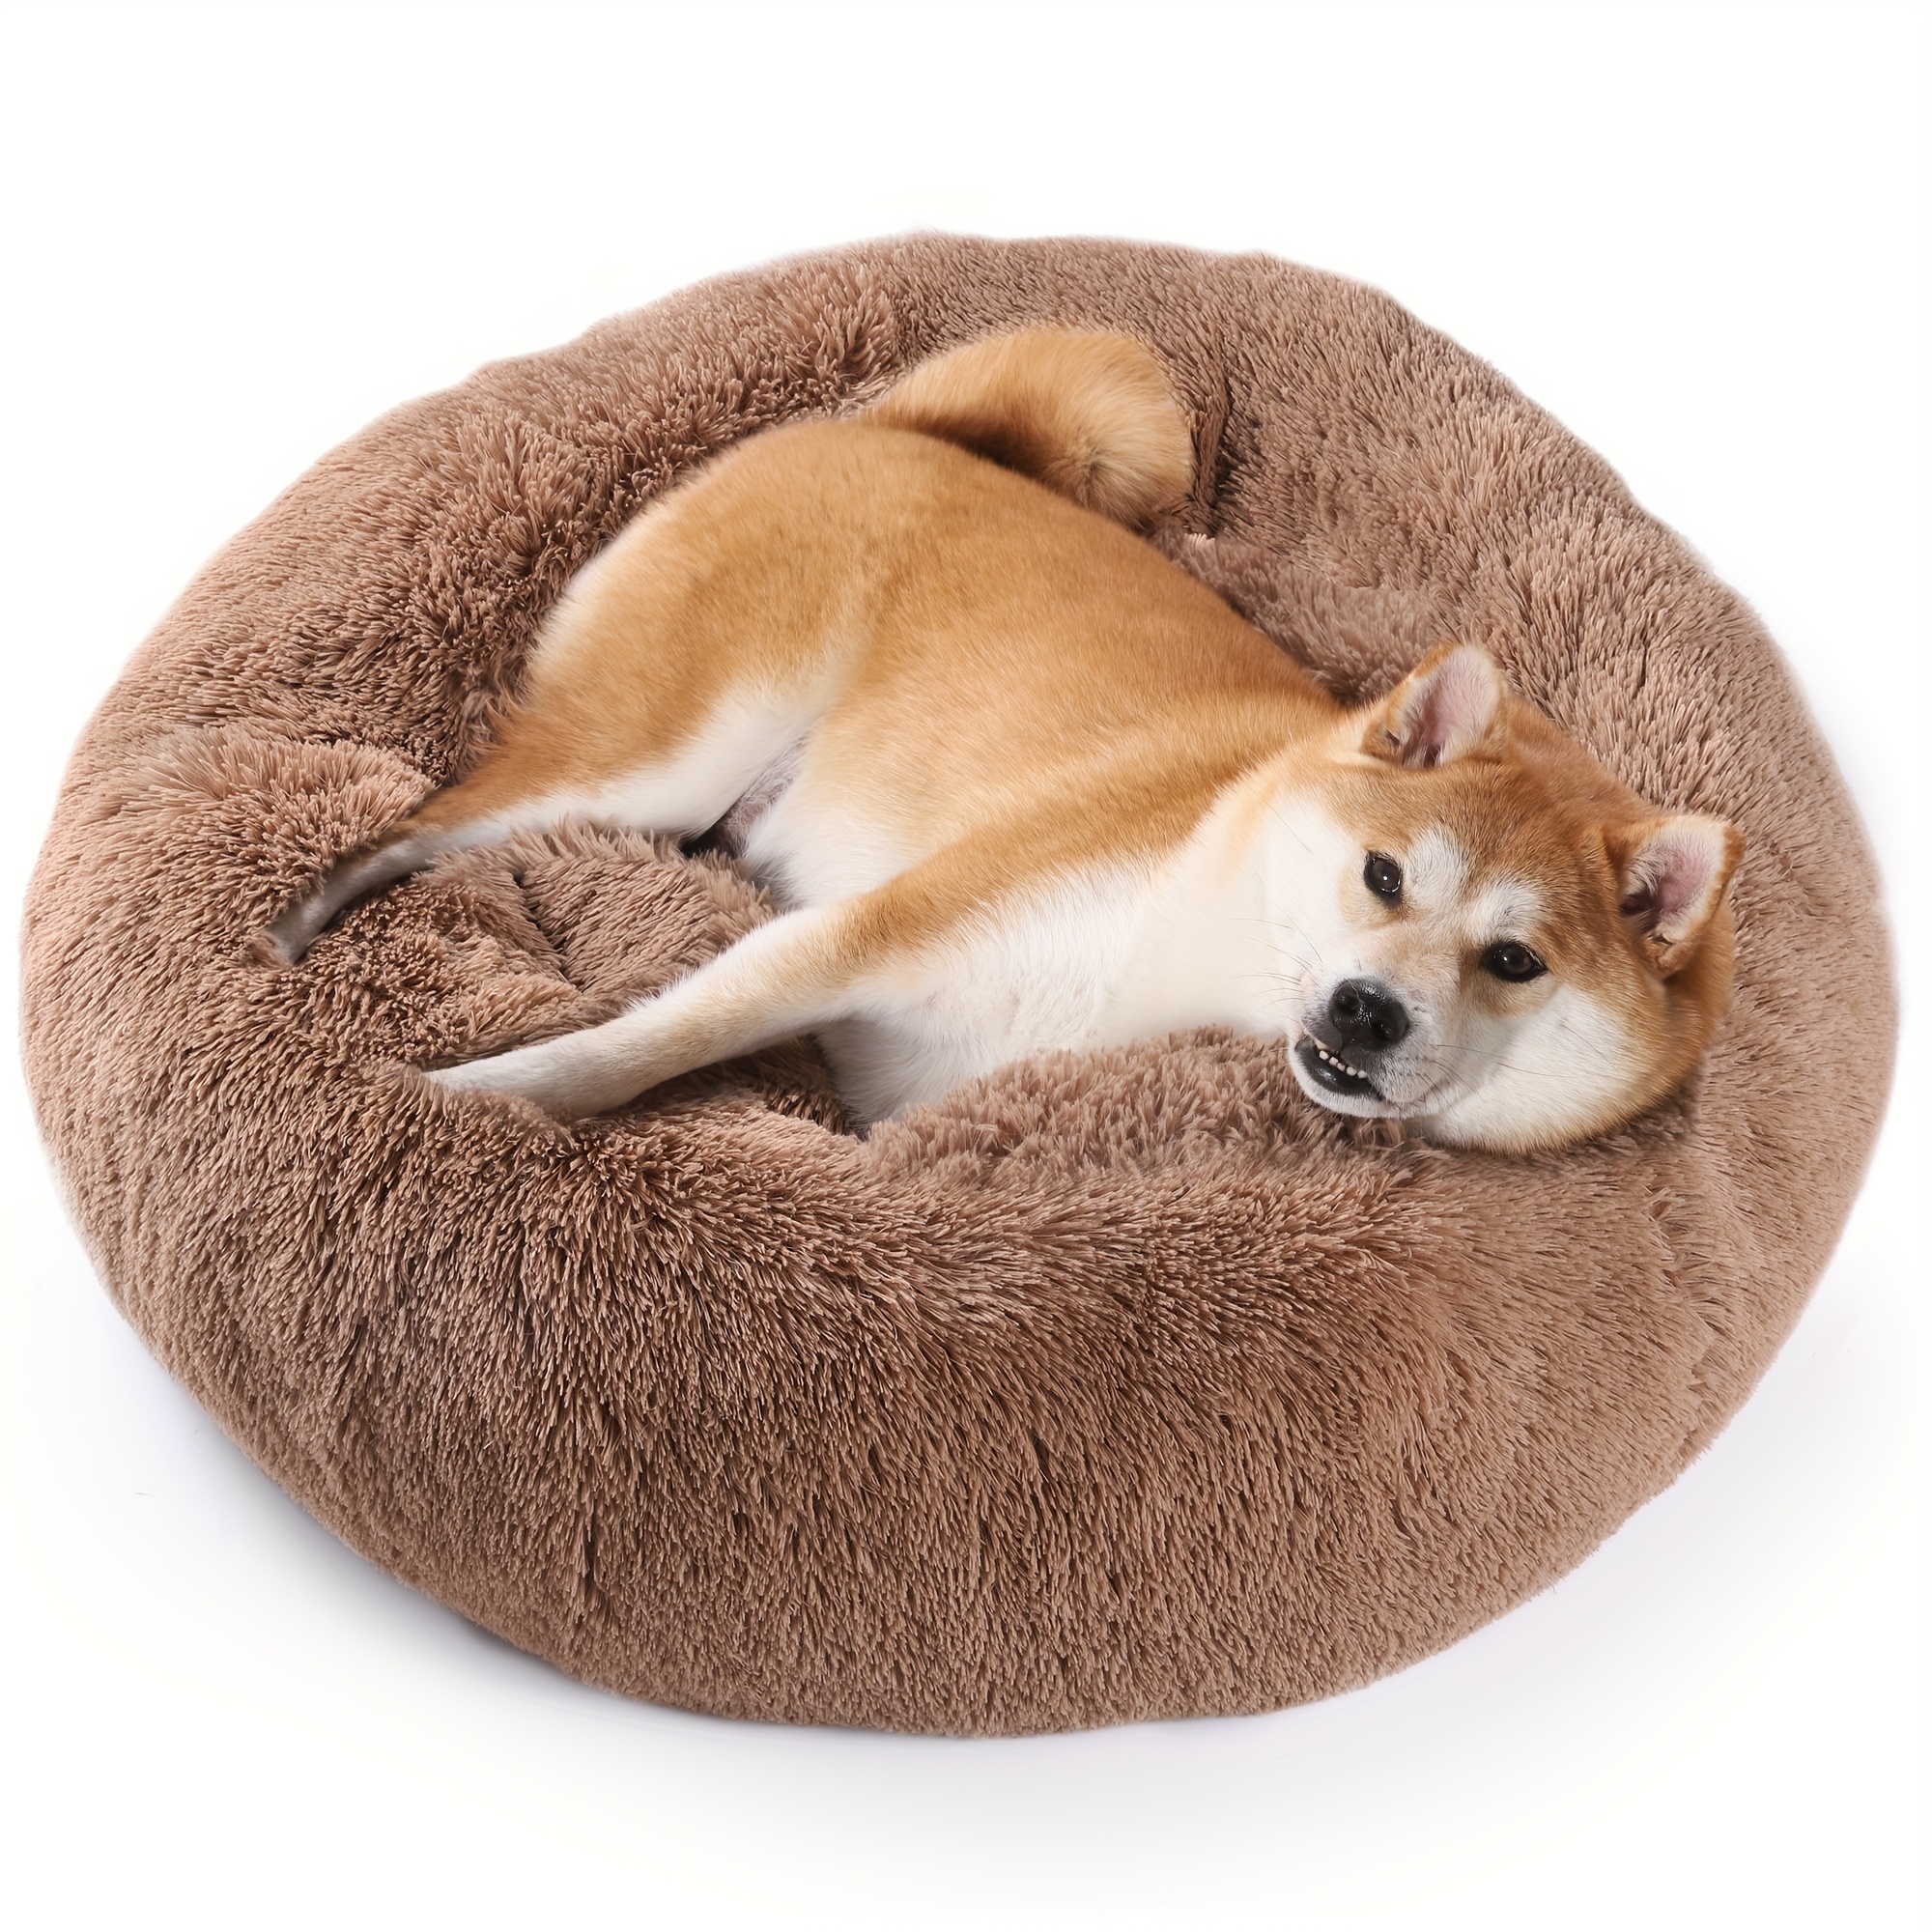 

Yarsca Calming Dog & Cat Bed, Donut Warming Cozy Soft Round Bed, Fluffy Faux Fur Plush Cushion Pet Indoor Bed, Brown, 36 Inch, Fits Up To 100 Lbs Pets